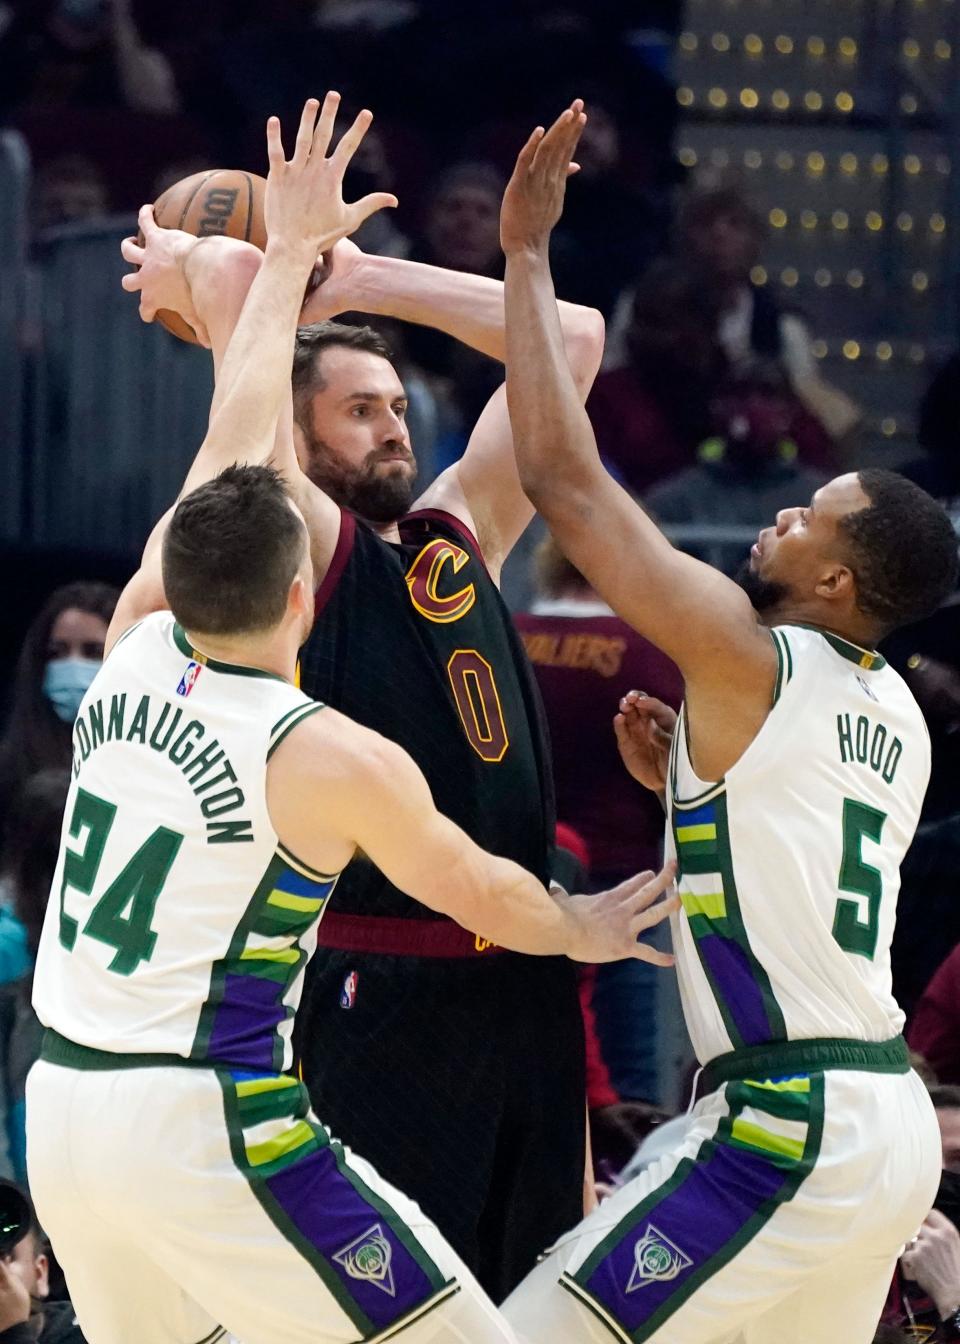 Cavaliers forward Kevin Love, center, passes as Milwaukee Bucks' Pat Connaughton, left, and Rodney Hood defend in the first half of the Cavs' 115-99 win Wednesday night. [Tony Dejak/Associated Press]